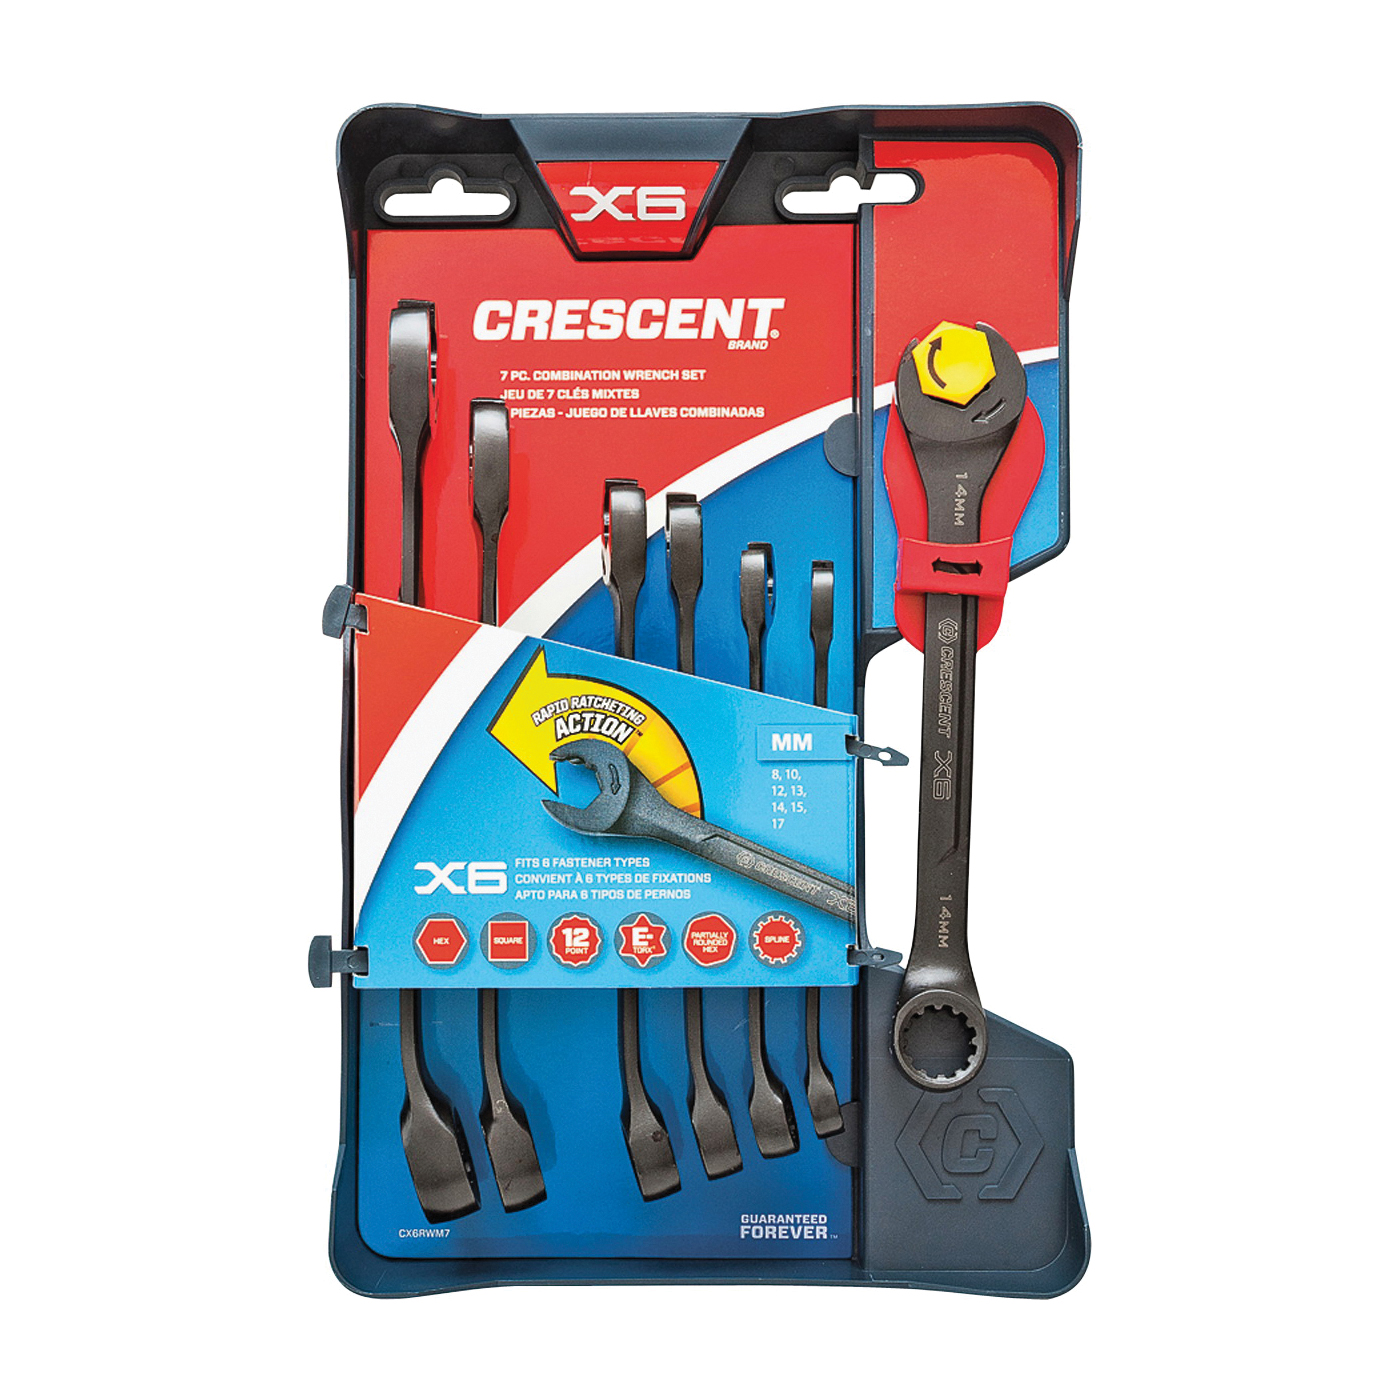 CX6RWM7 Wrench Set, 7-Piece, Specifications: Metric Measurement